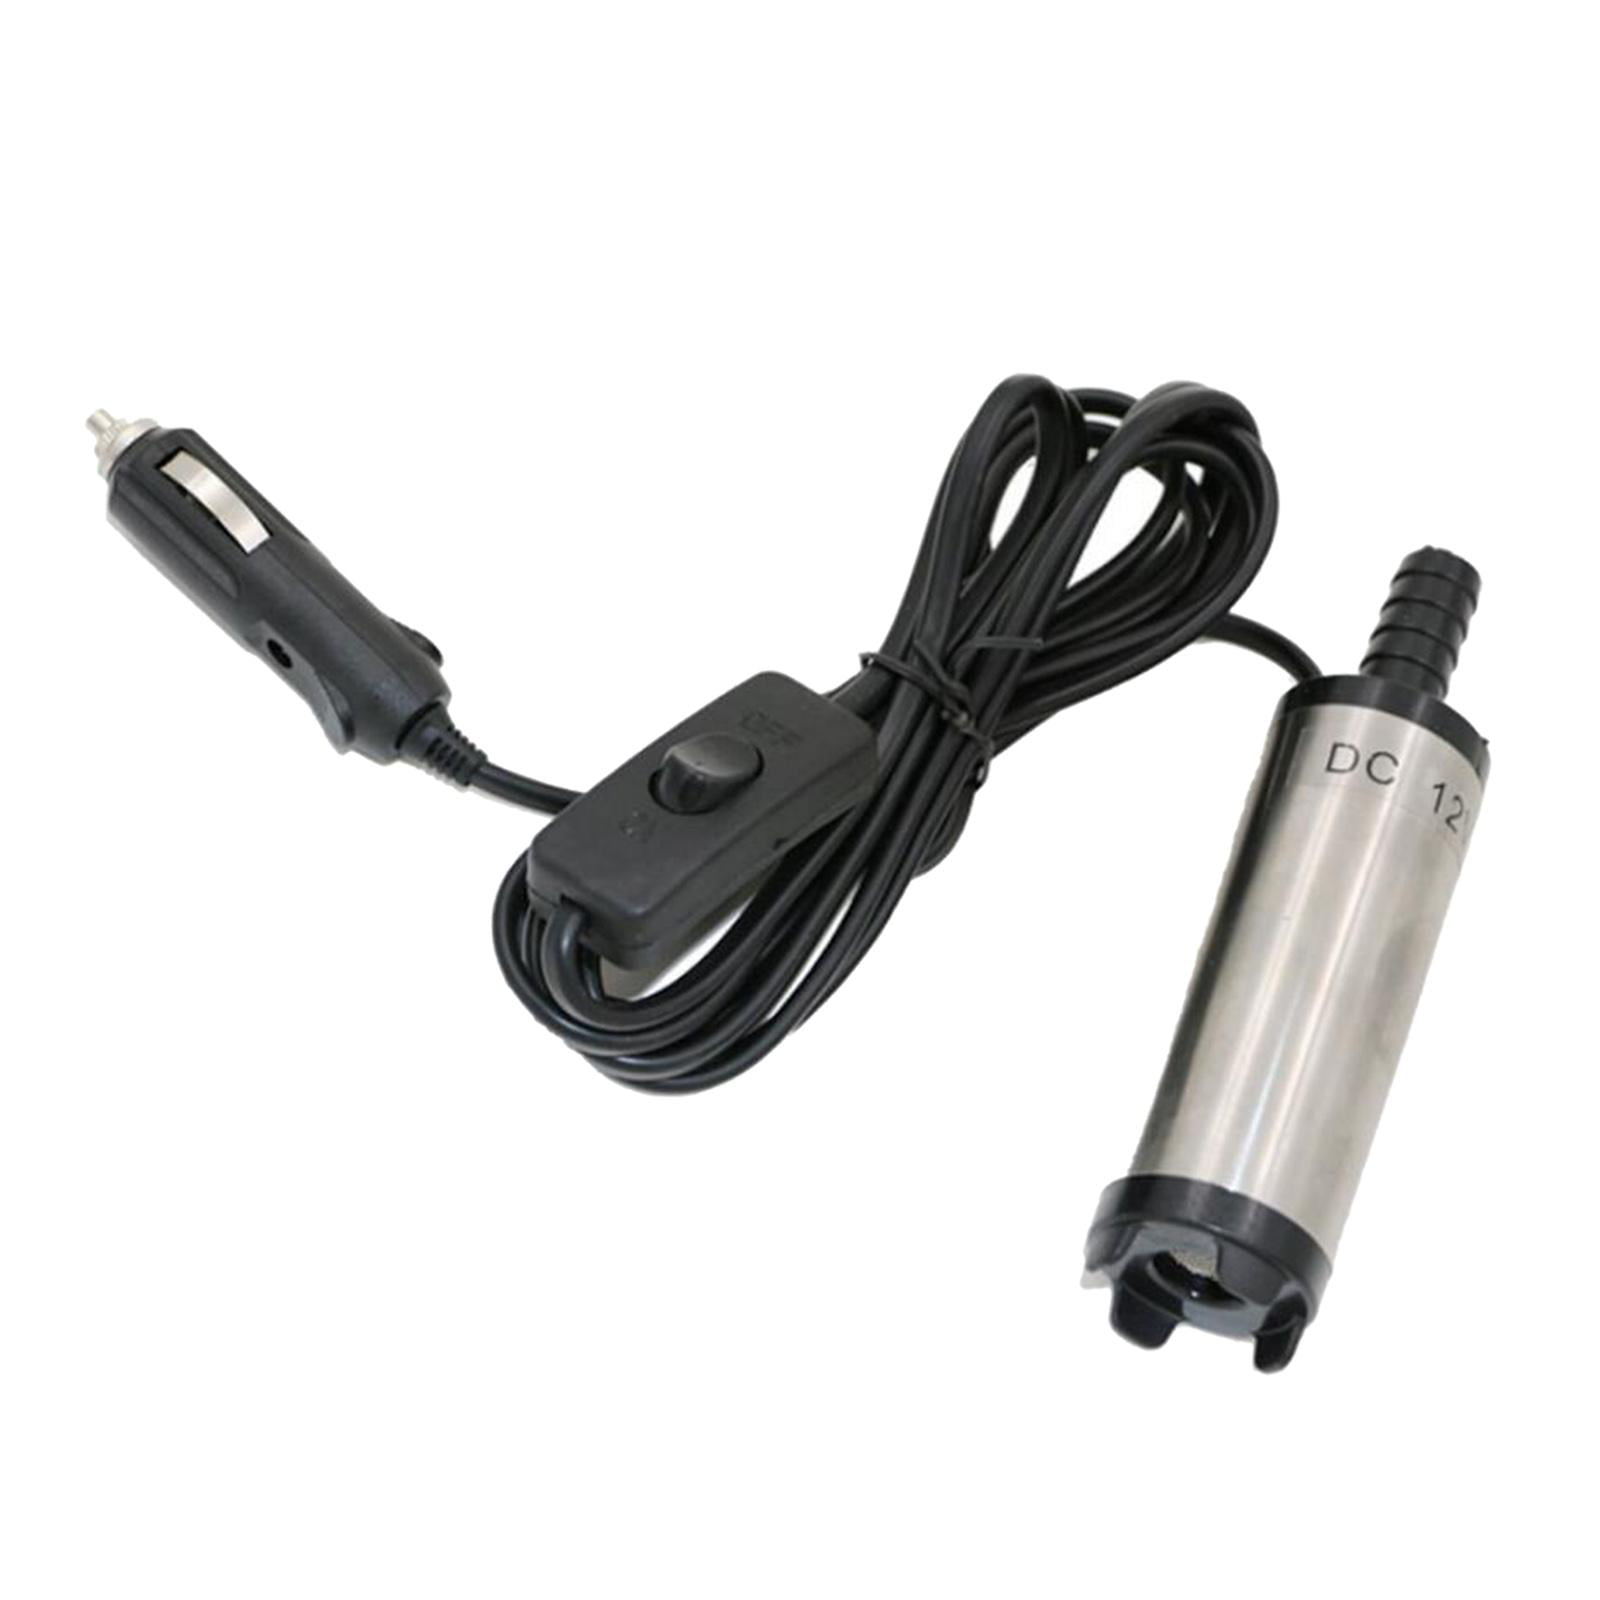 Tiny 12V Submersible Pump for Water, Oil and Diesel - 301 